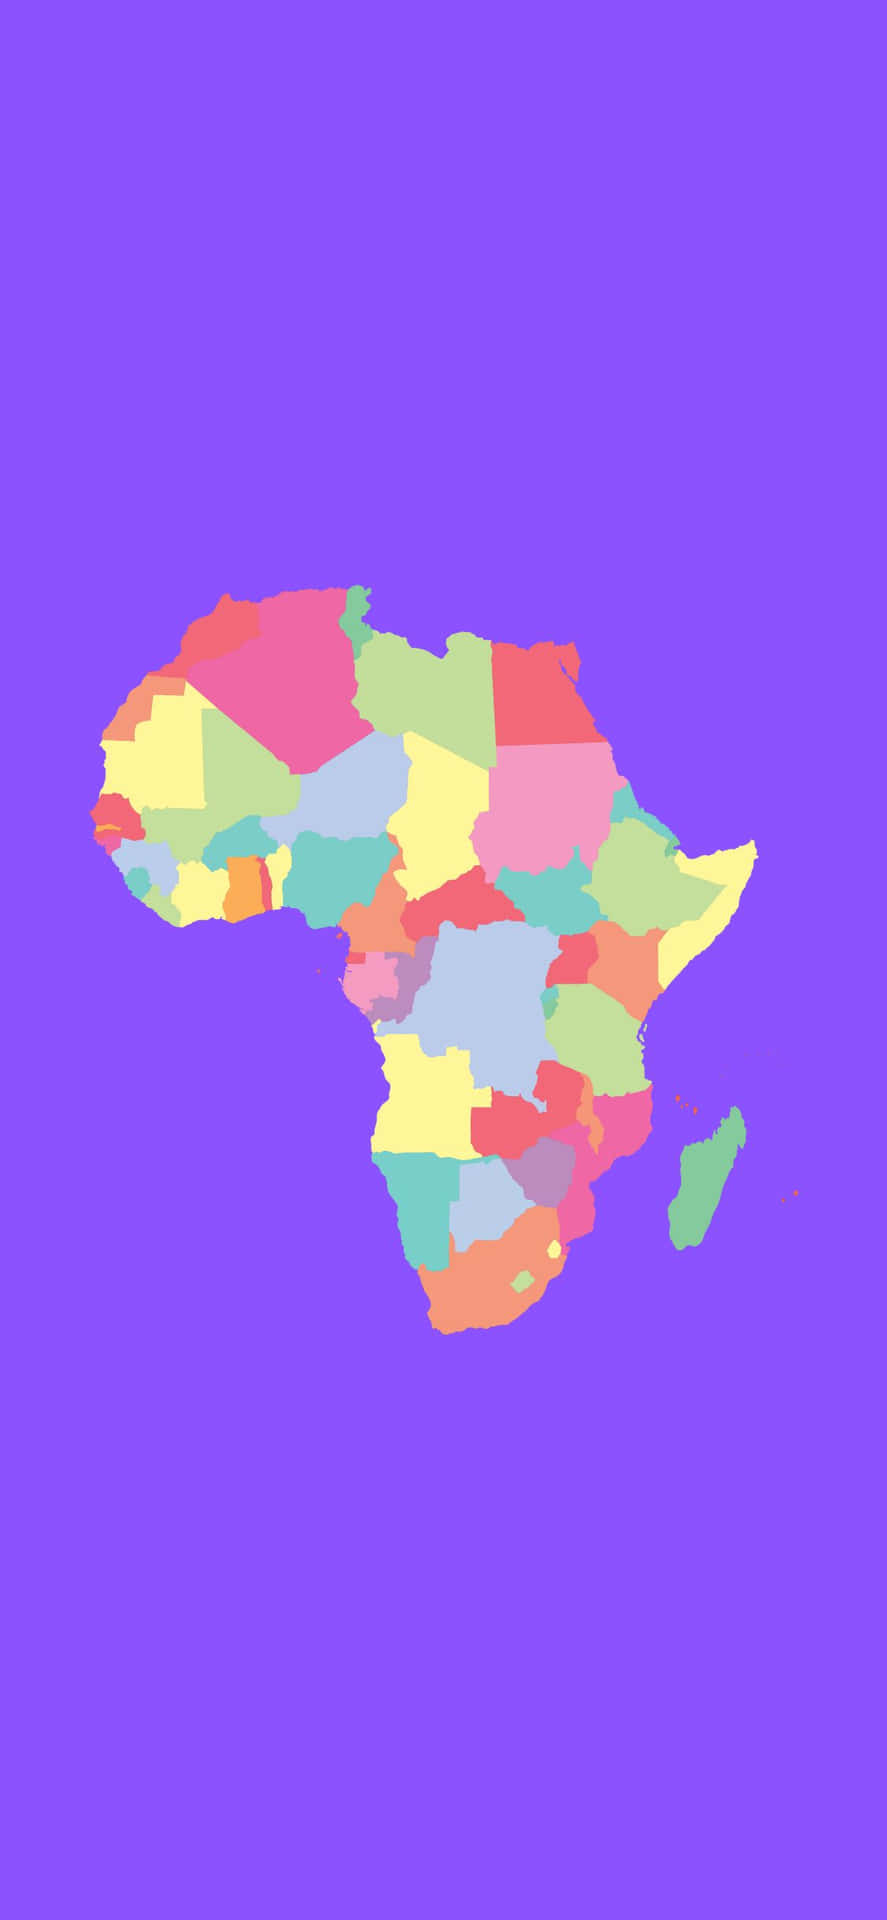 africa map on a purple background